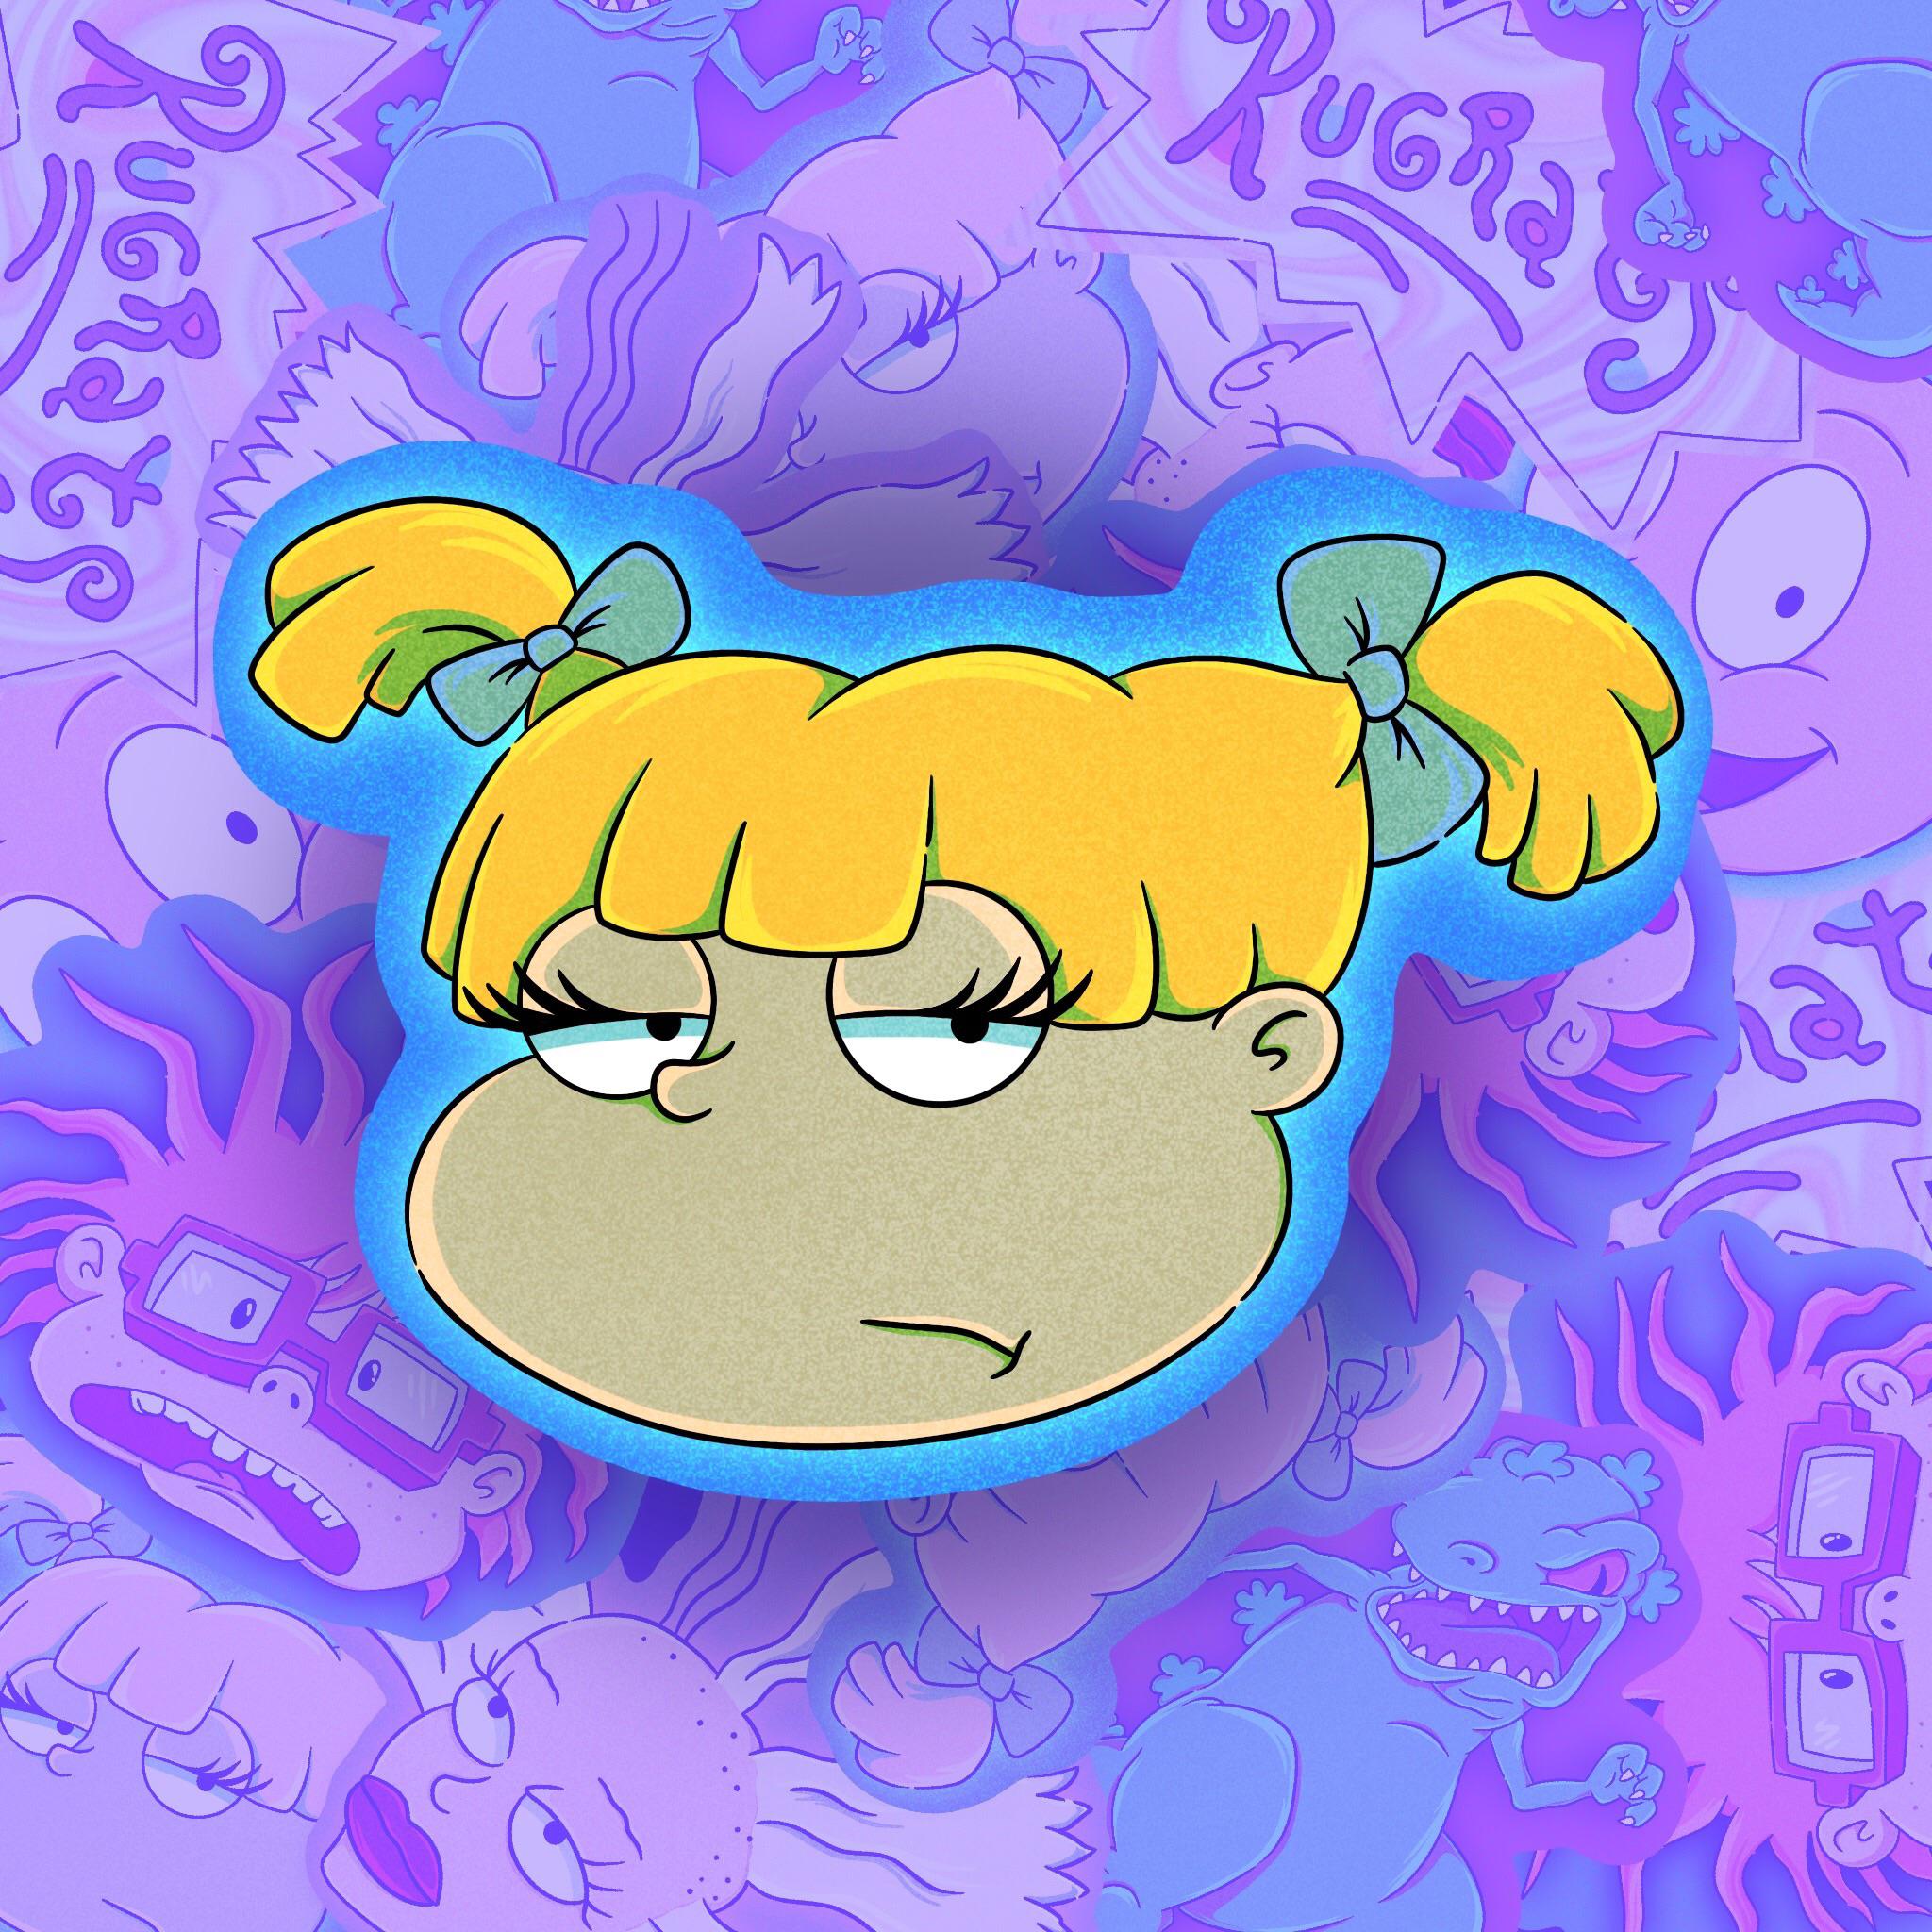 I created a Rugrats 6 sticker pack, and I think the Angelica design is my favorite